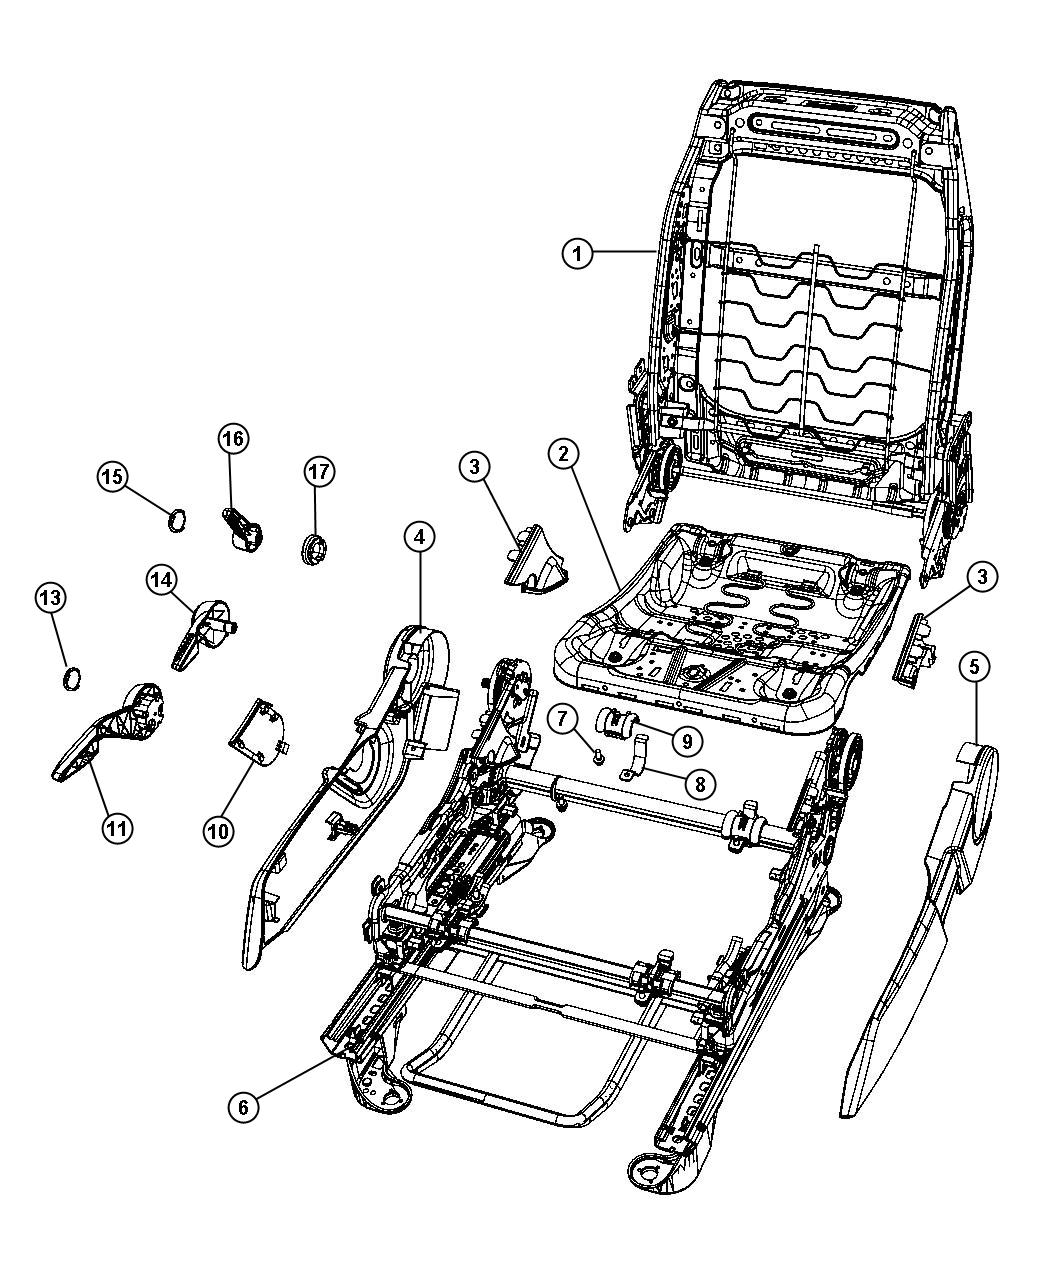 Diagram Adjusters , Recliners and Shields - Driver Seat - RHD. for your Dodge